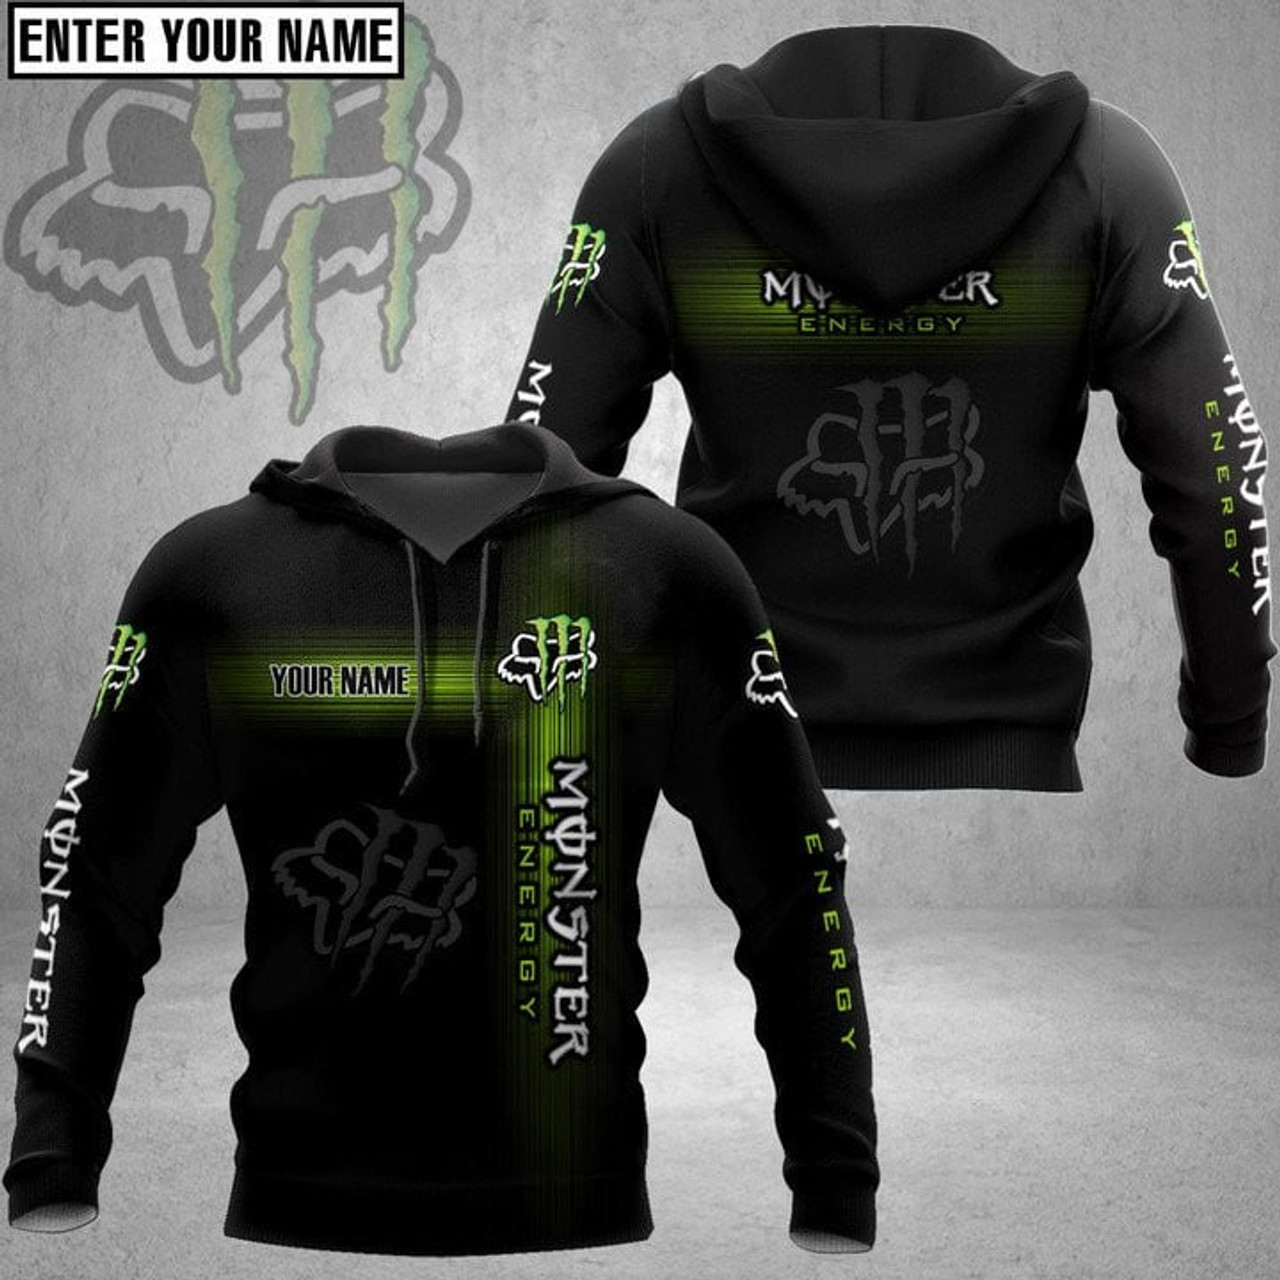 OFFICIAL-MONSTER-ENERGY-SPORT-PULLOVER-HOODIES/ADD-YOUR-OWN-CUSTOMIZED-PERSONAL-NAME-PRINTED-ON-MONSTER-ENERGY-HOODIE-DESIGN!!